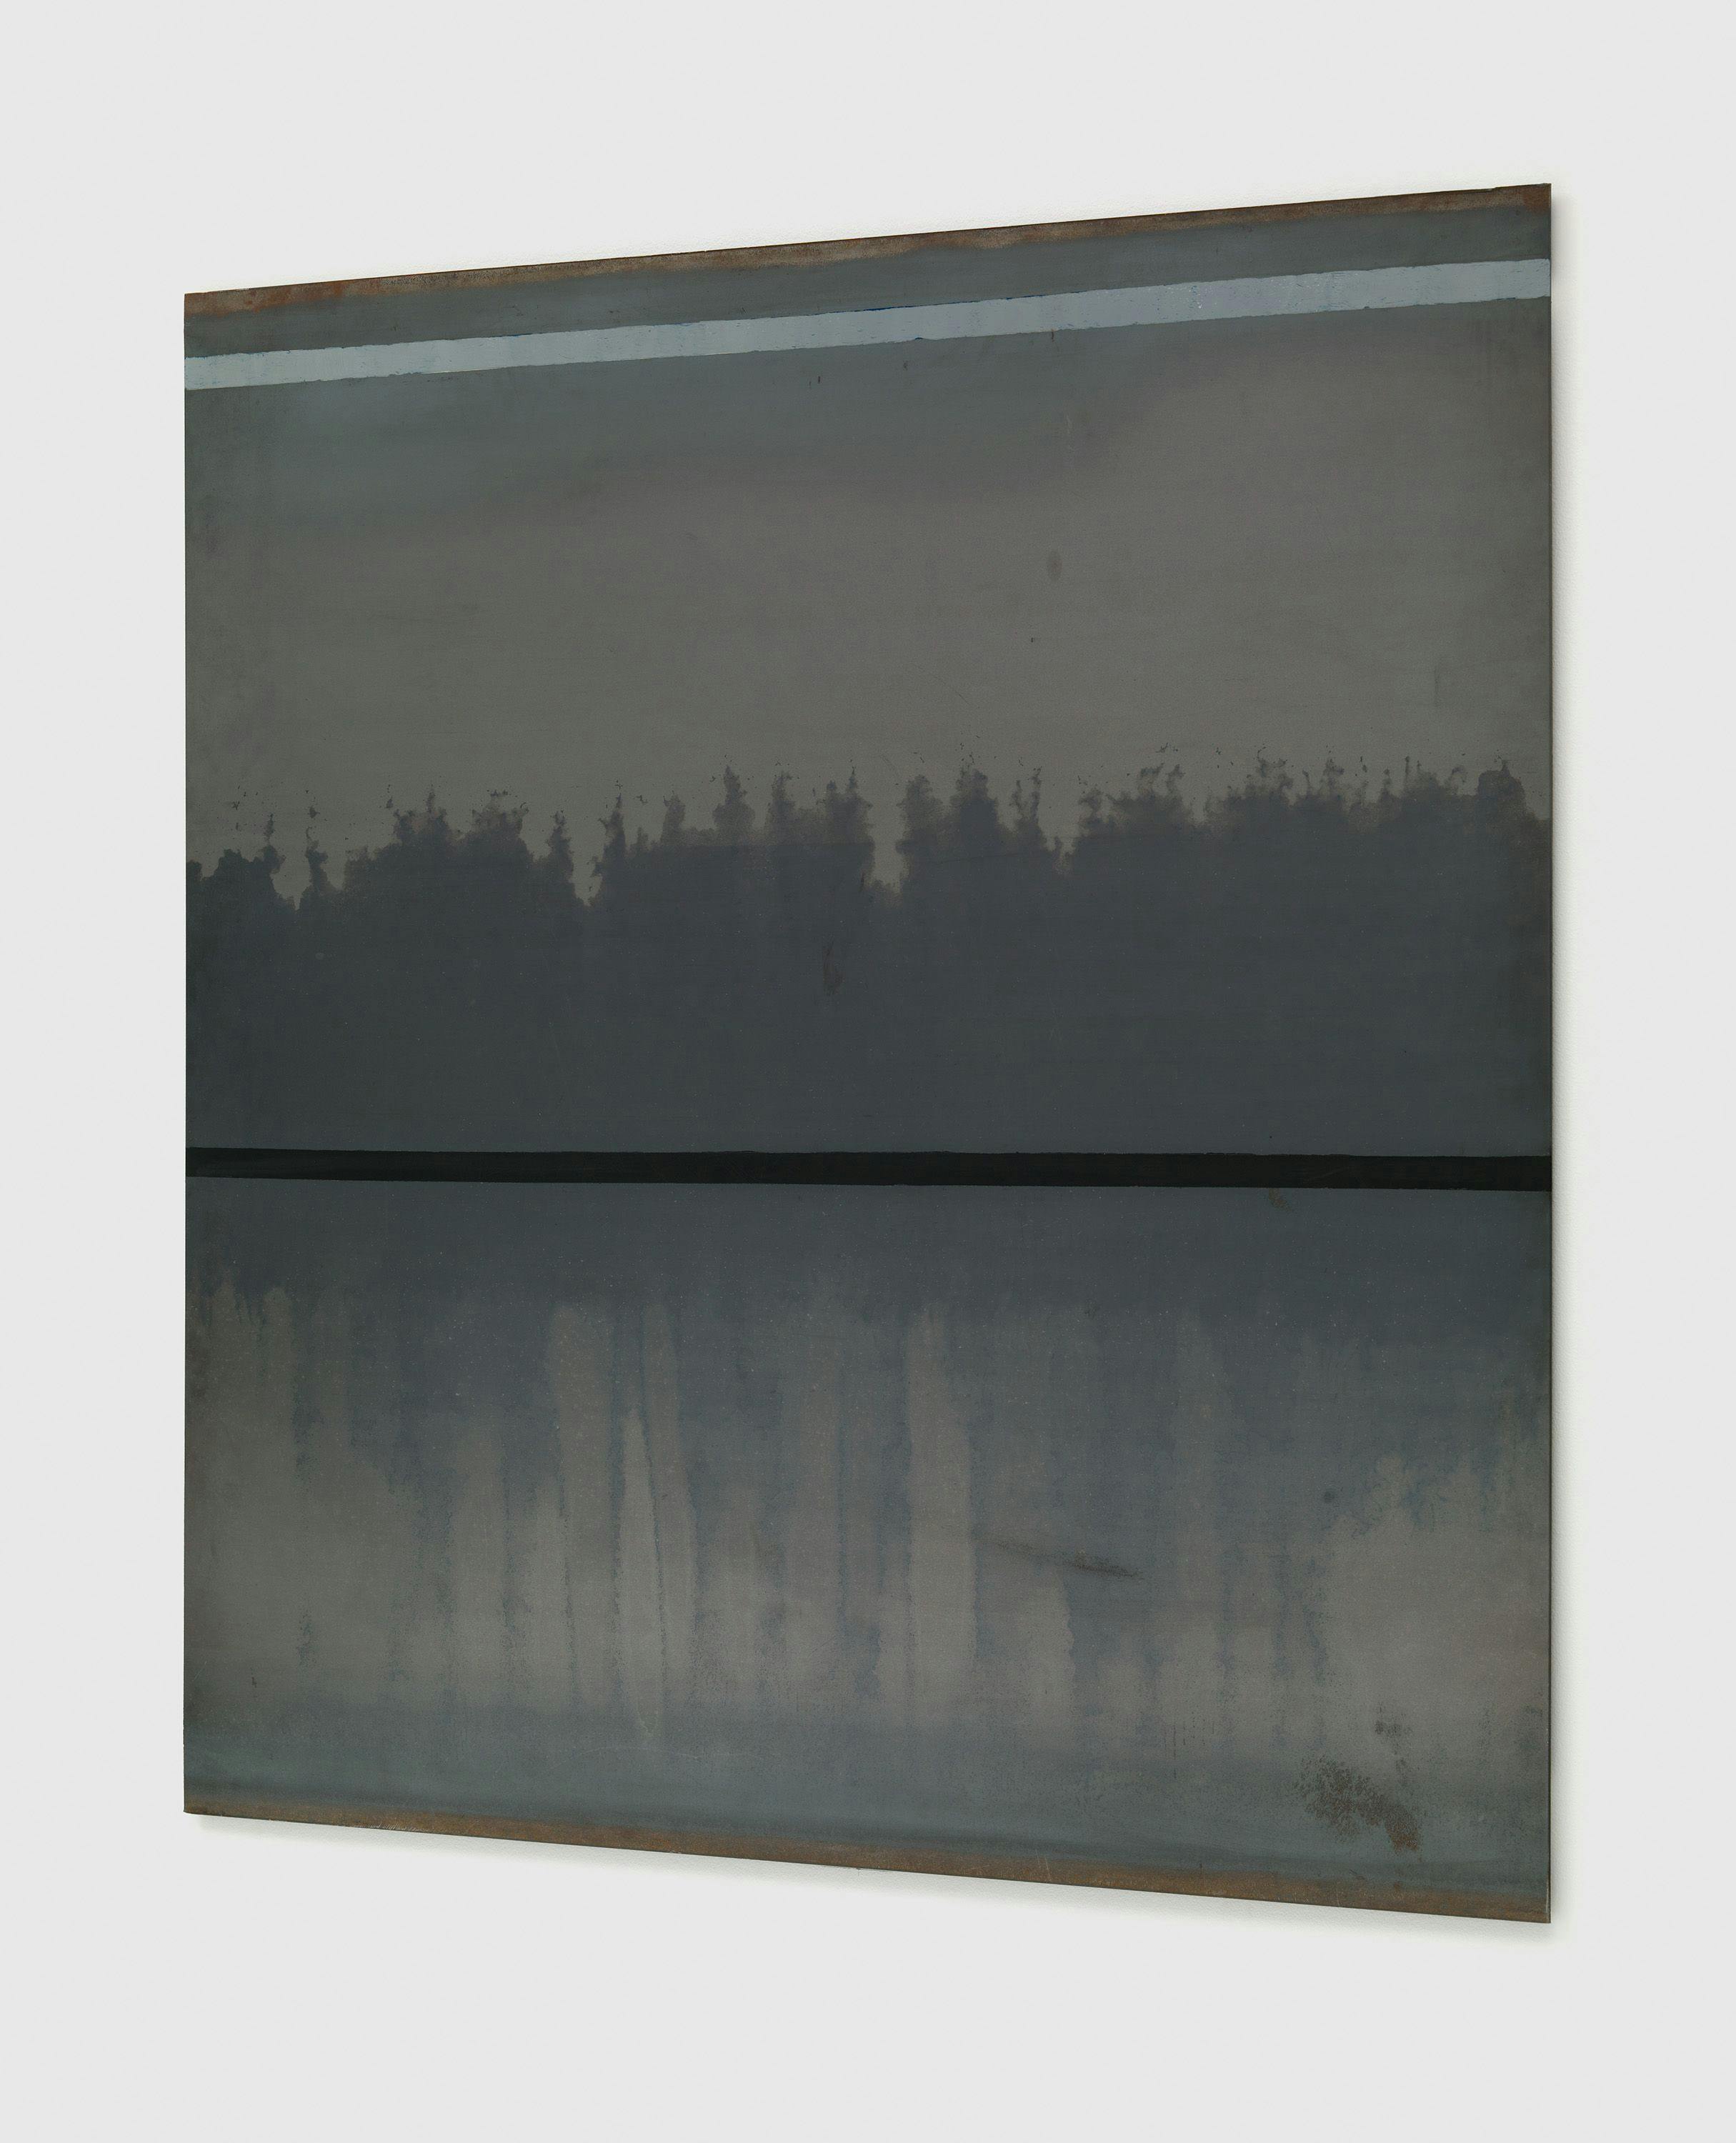 An untitled painting by Merrill Wagner, dated 1994.